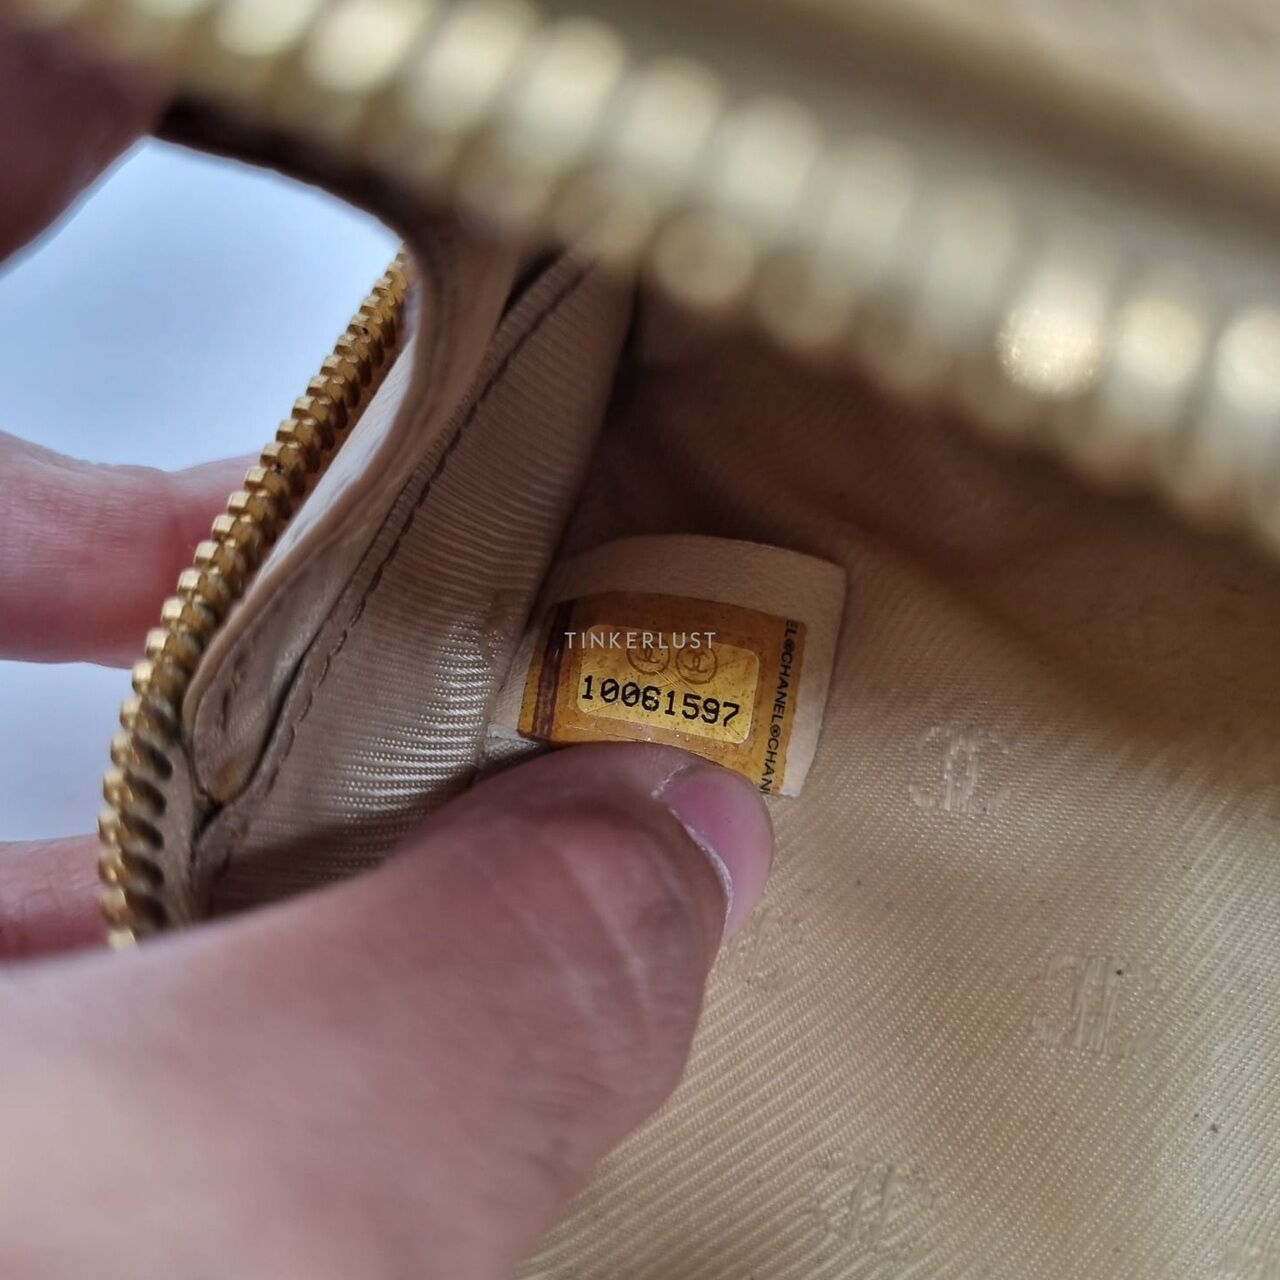 Chanel Beige Leather #10 GHW Pouch